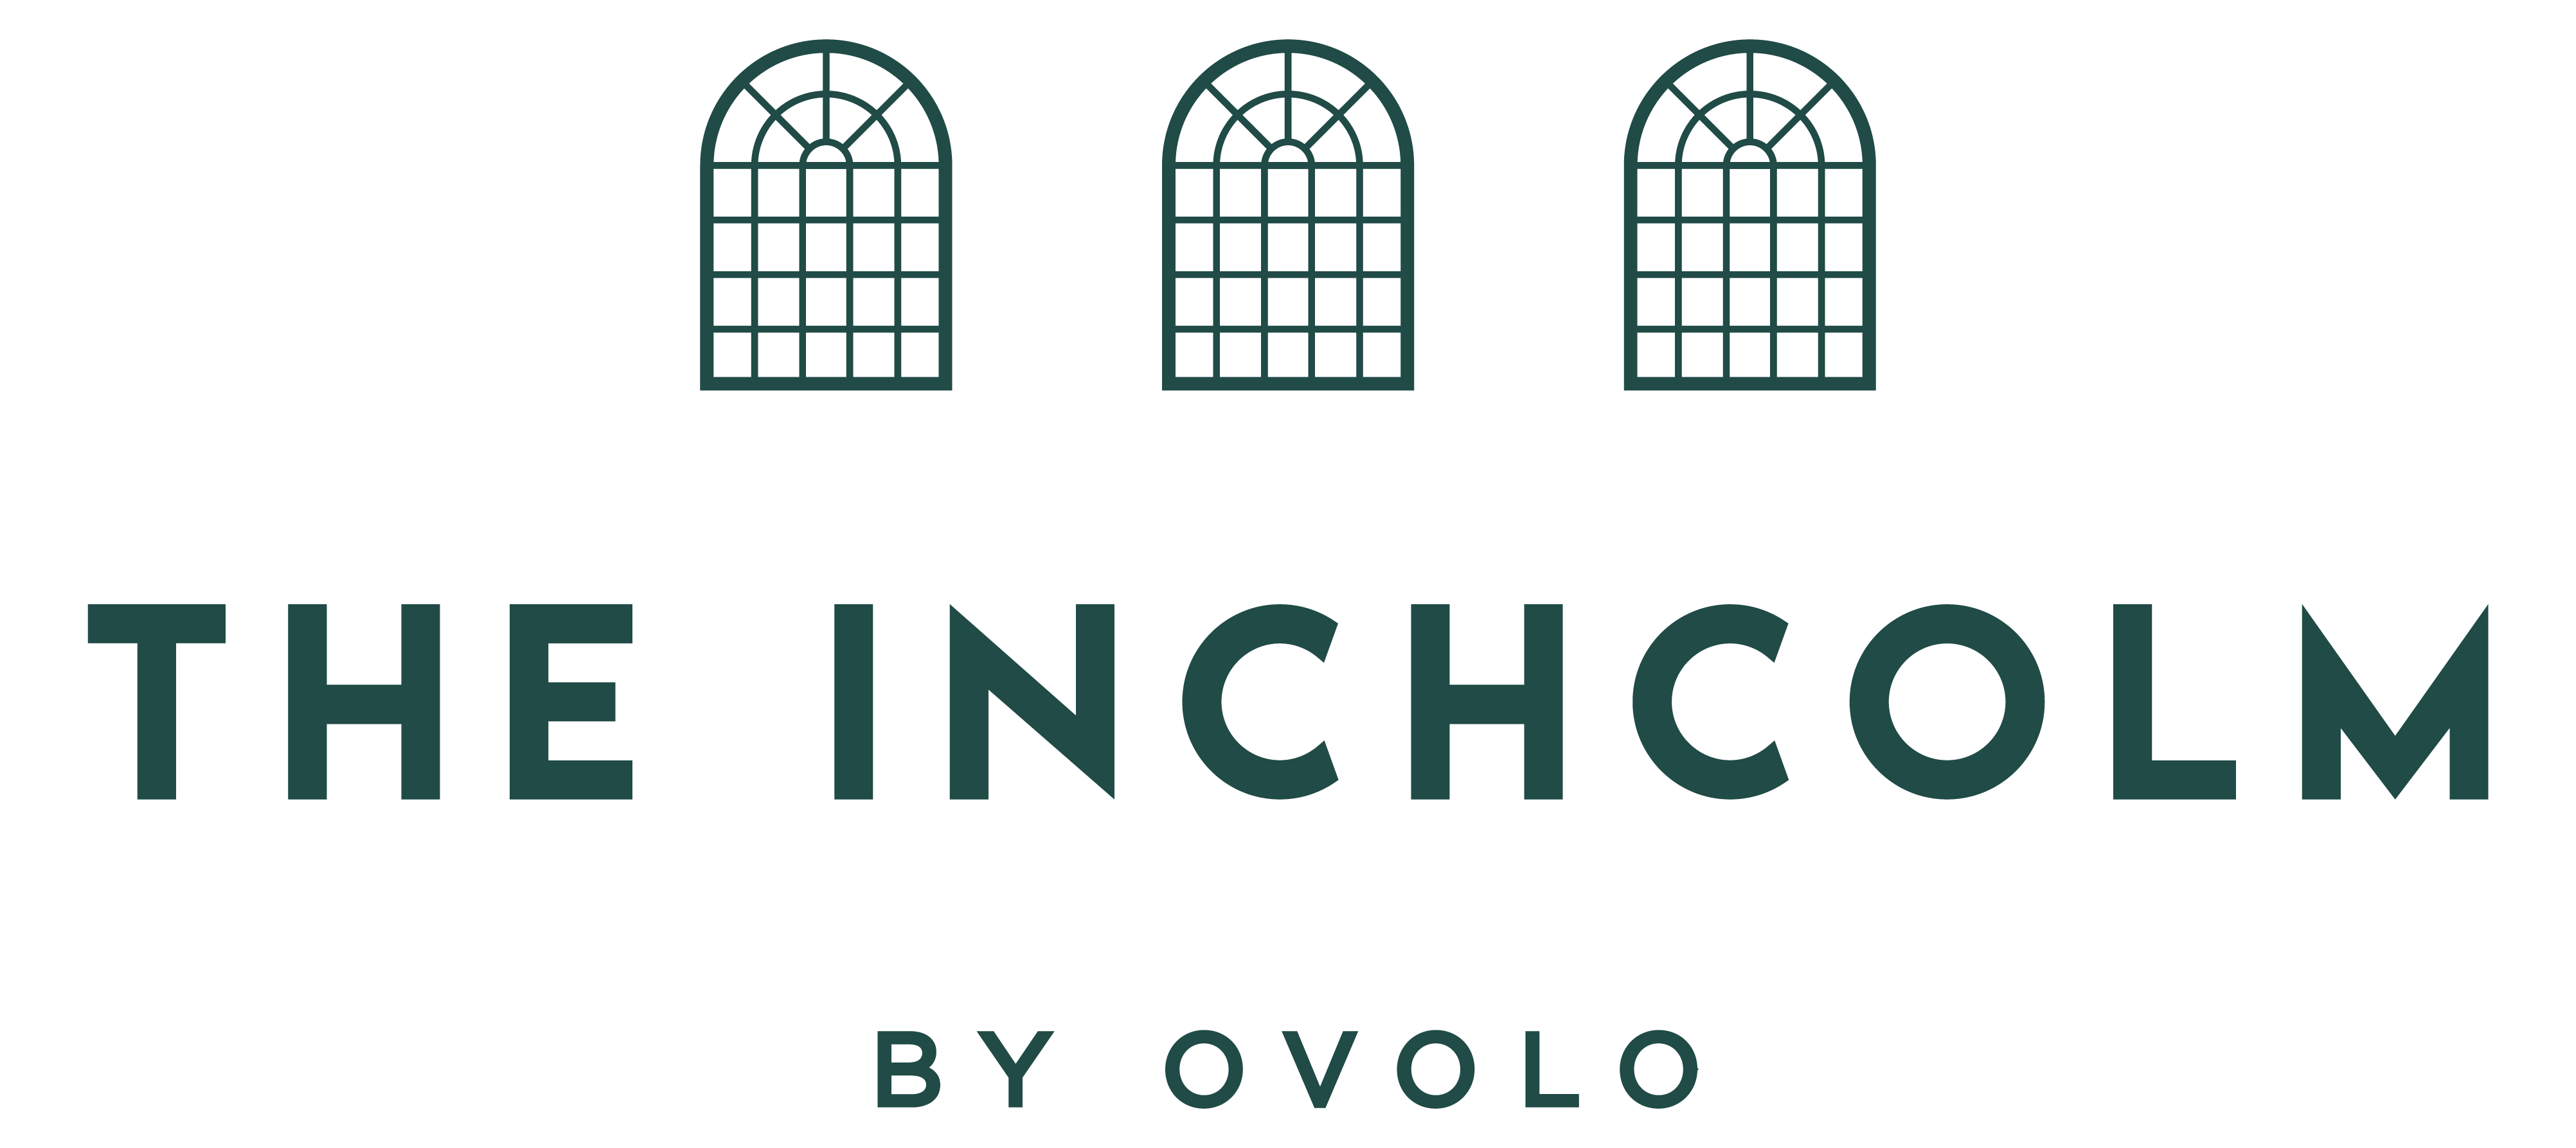 THE INCHCOLM BY OVOLO